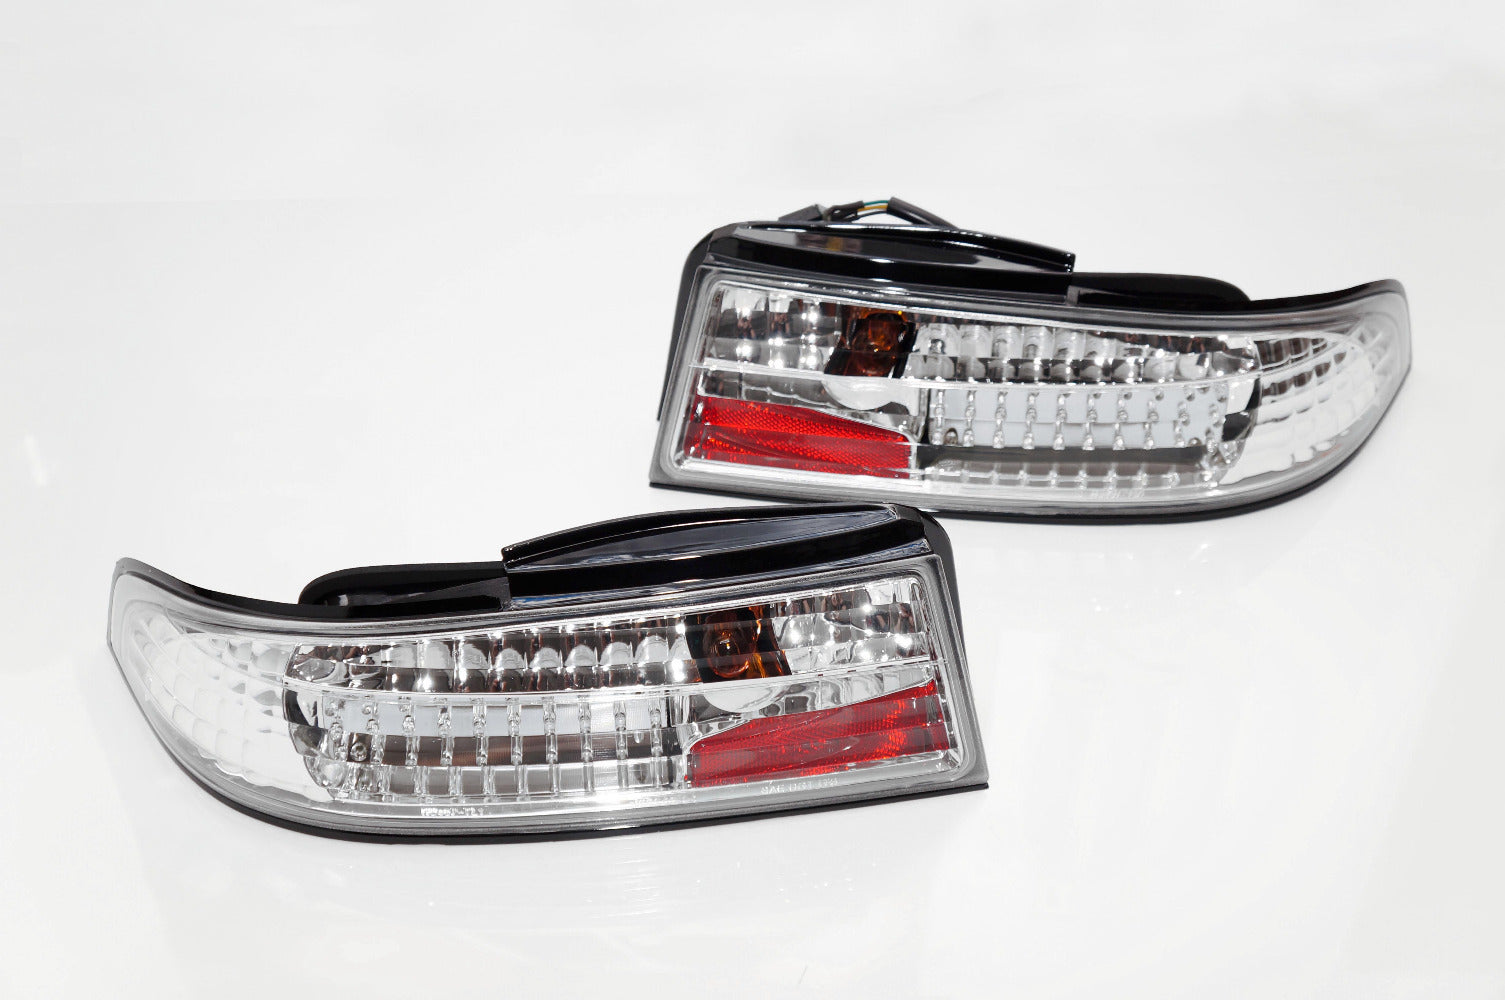 1995-1998 Nissan 240sx Circuit Sports All Clear Rear Tail Lamp Lights for S14